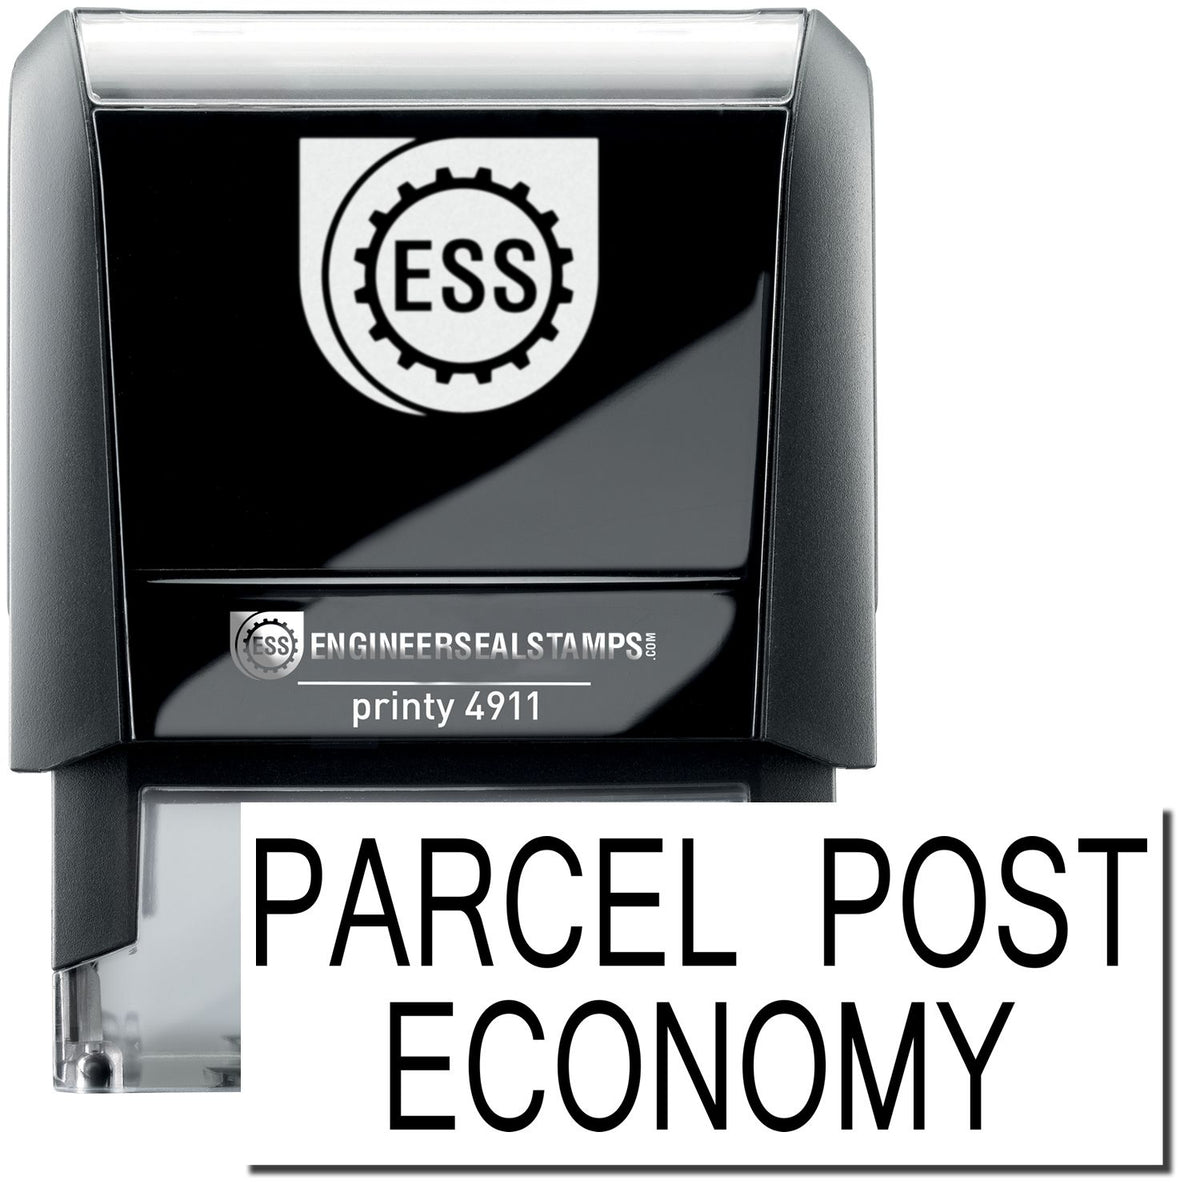 A self-inking stamp with a stamped image showing how the text &quot;PARCEL POST ECONOMY&quot; is displayed after stamping.